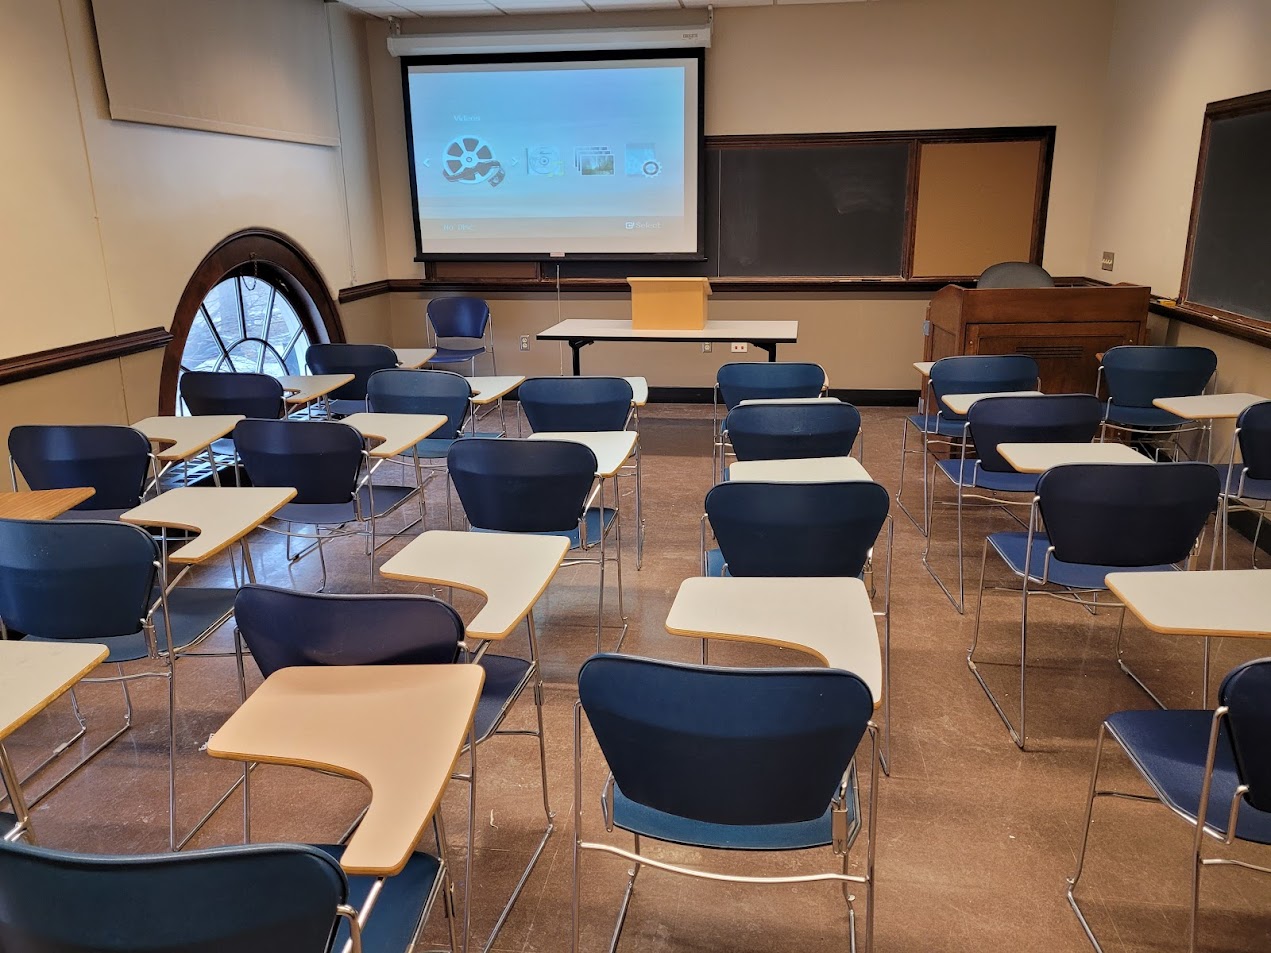 A view of the classroom with movable tableted arm chairs and chalkboard.